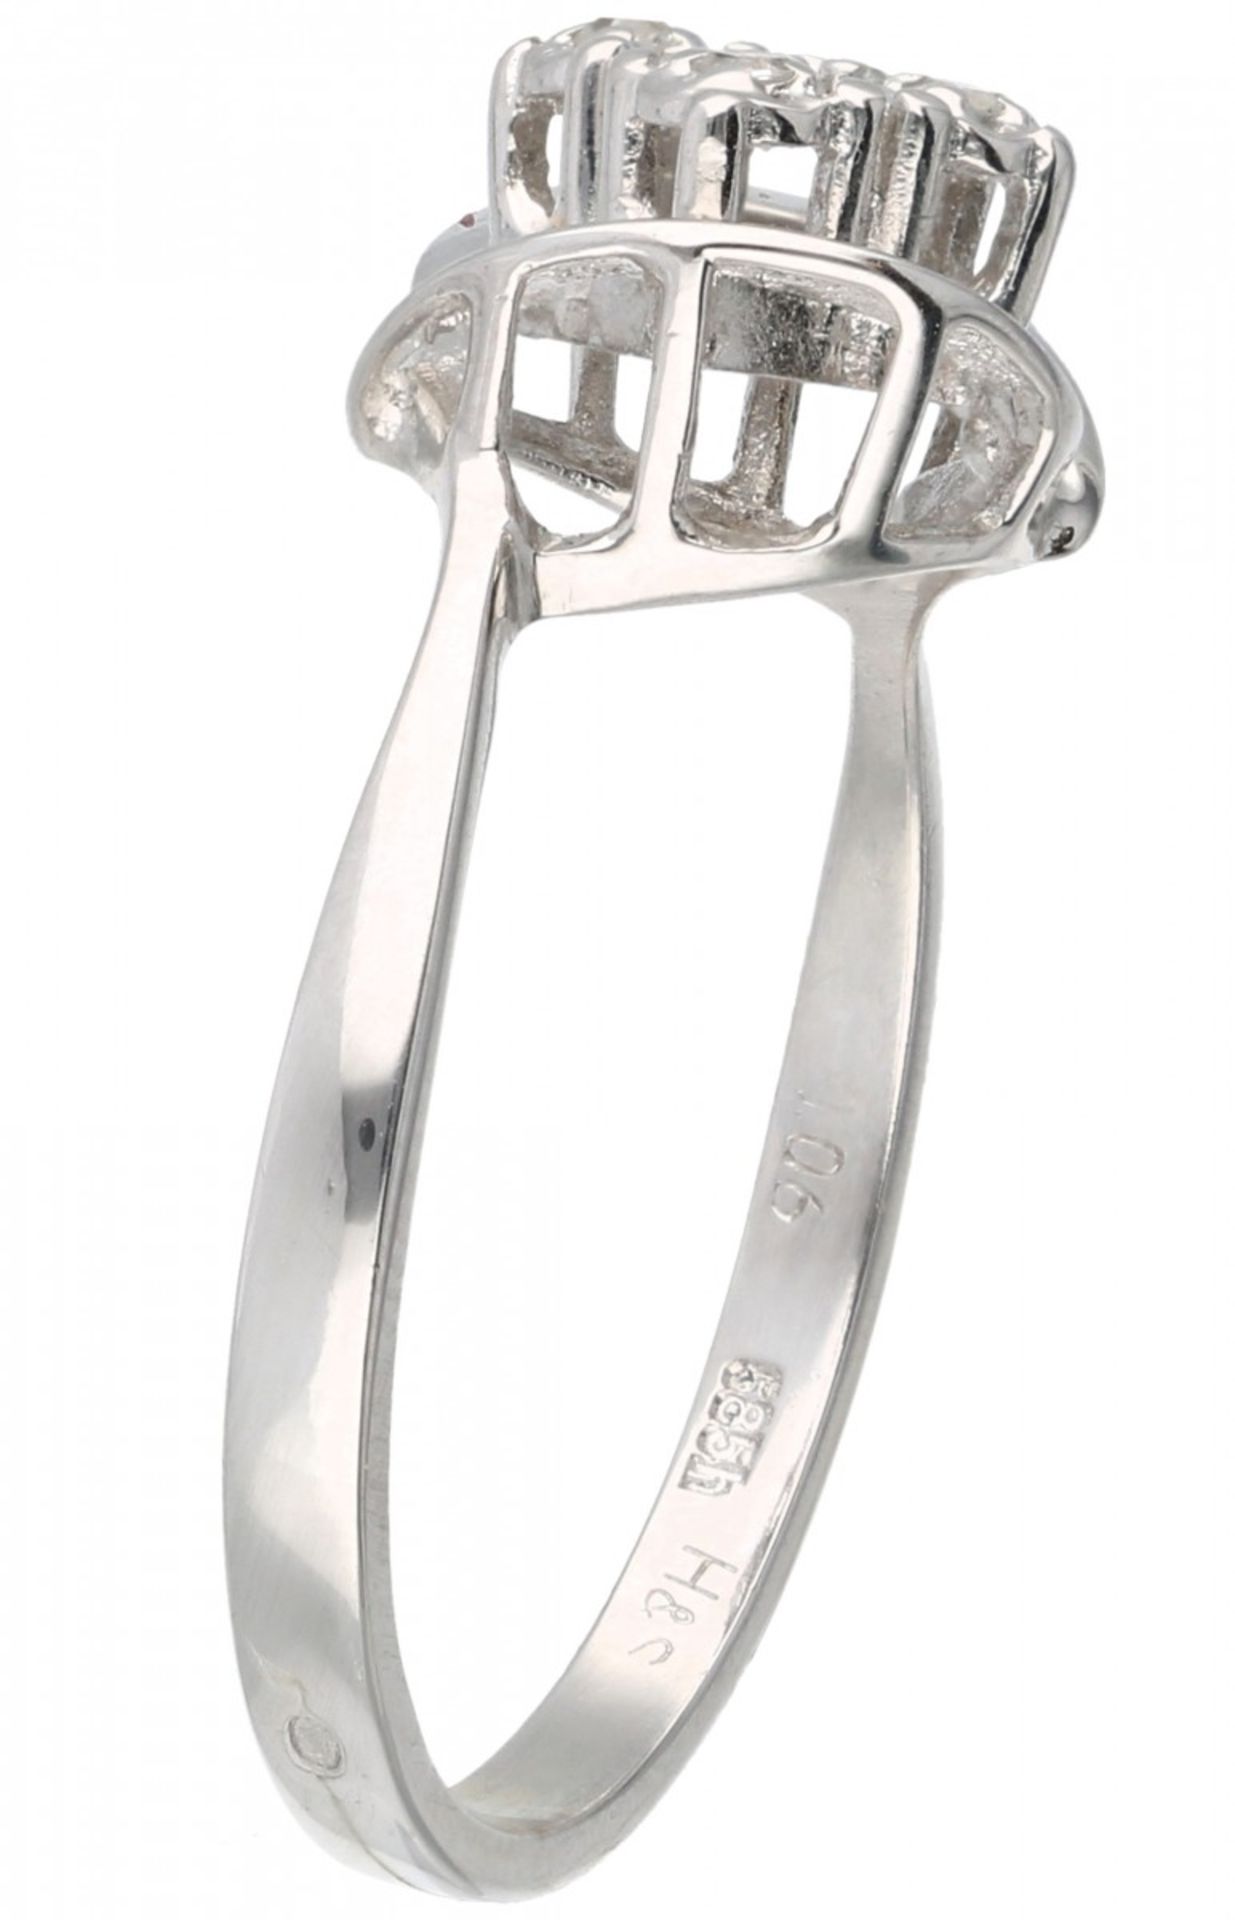 White gold ring set with diamond - 14 ct. - Image 2 of 2